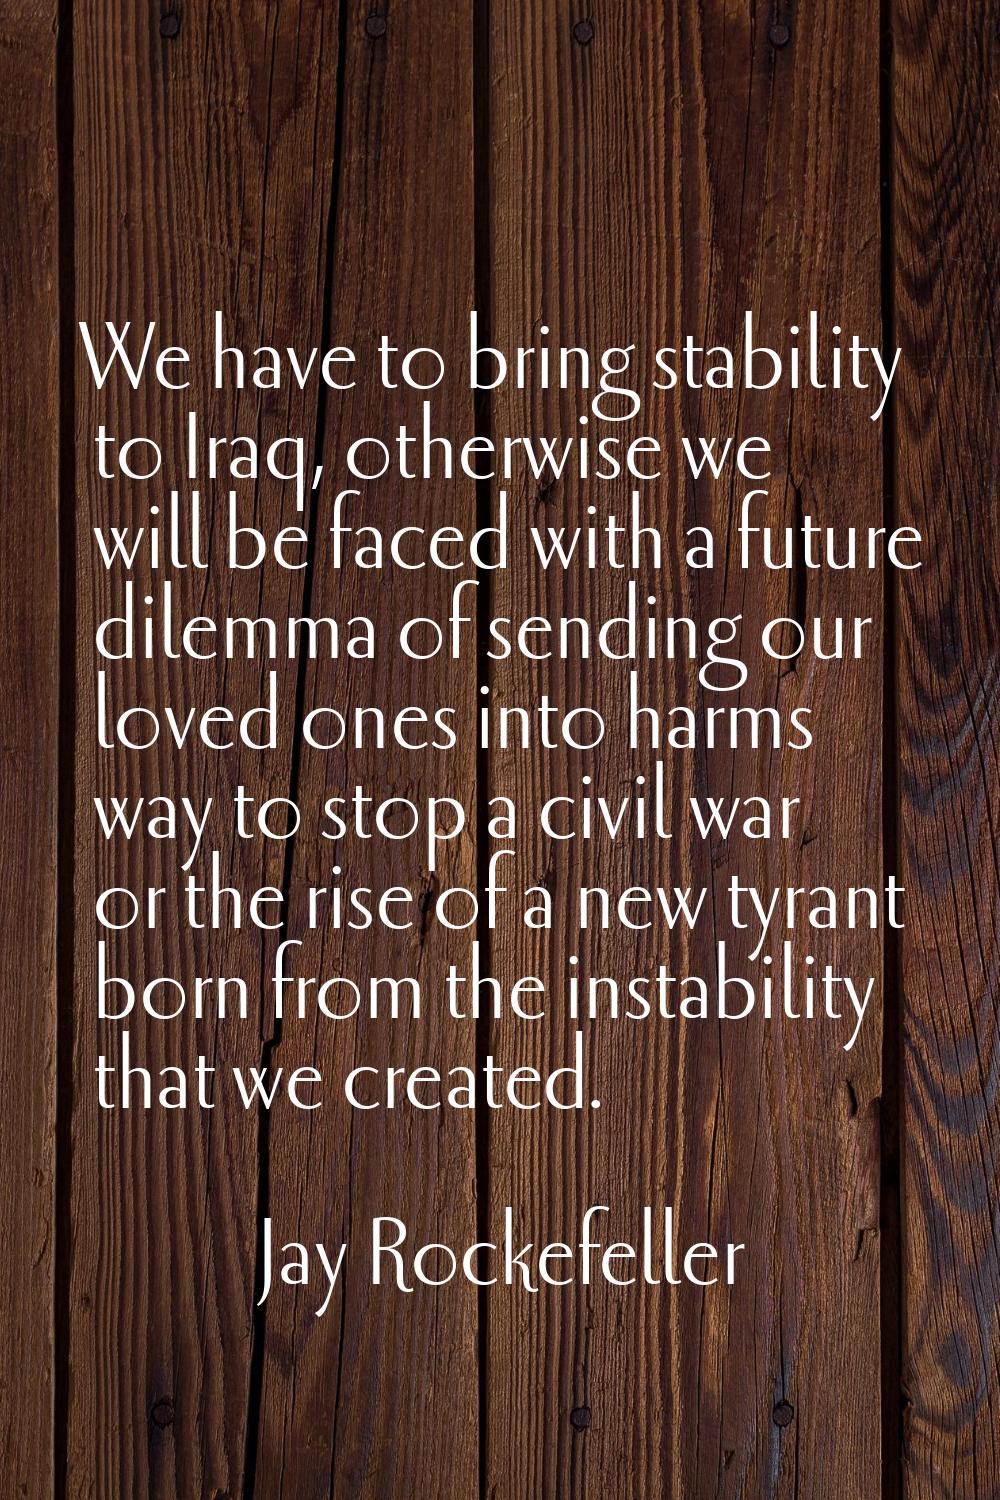 We have to bring stability to Iraq, otherwise we will be faced with a future dilemma of sending our